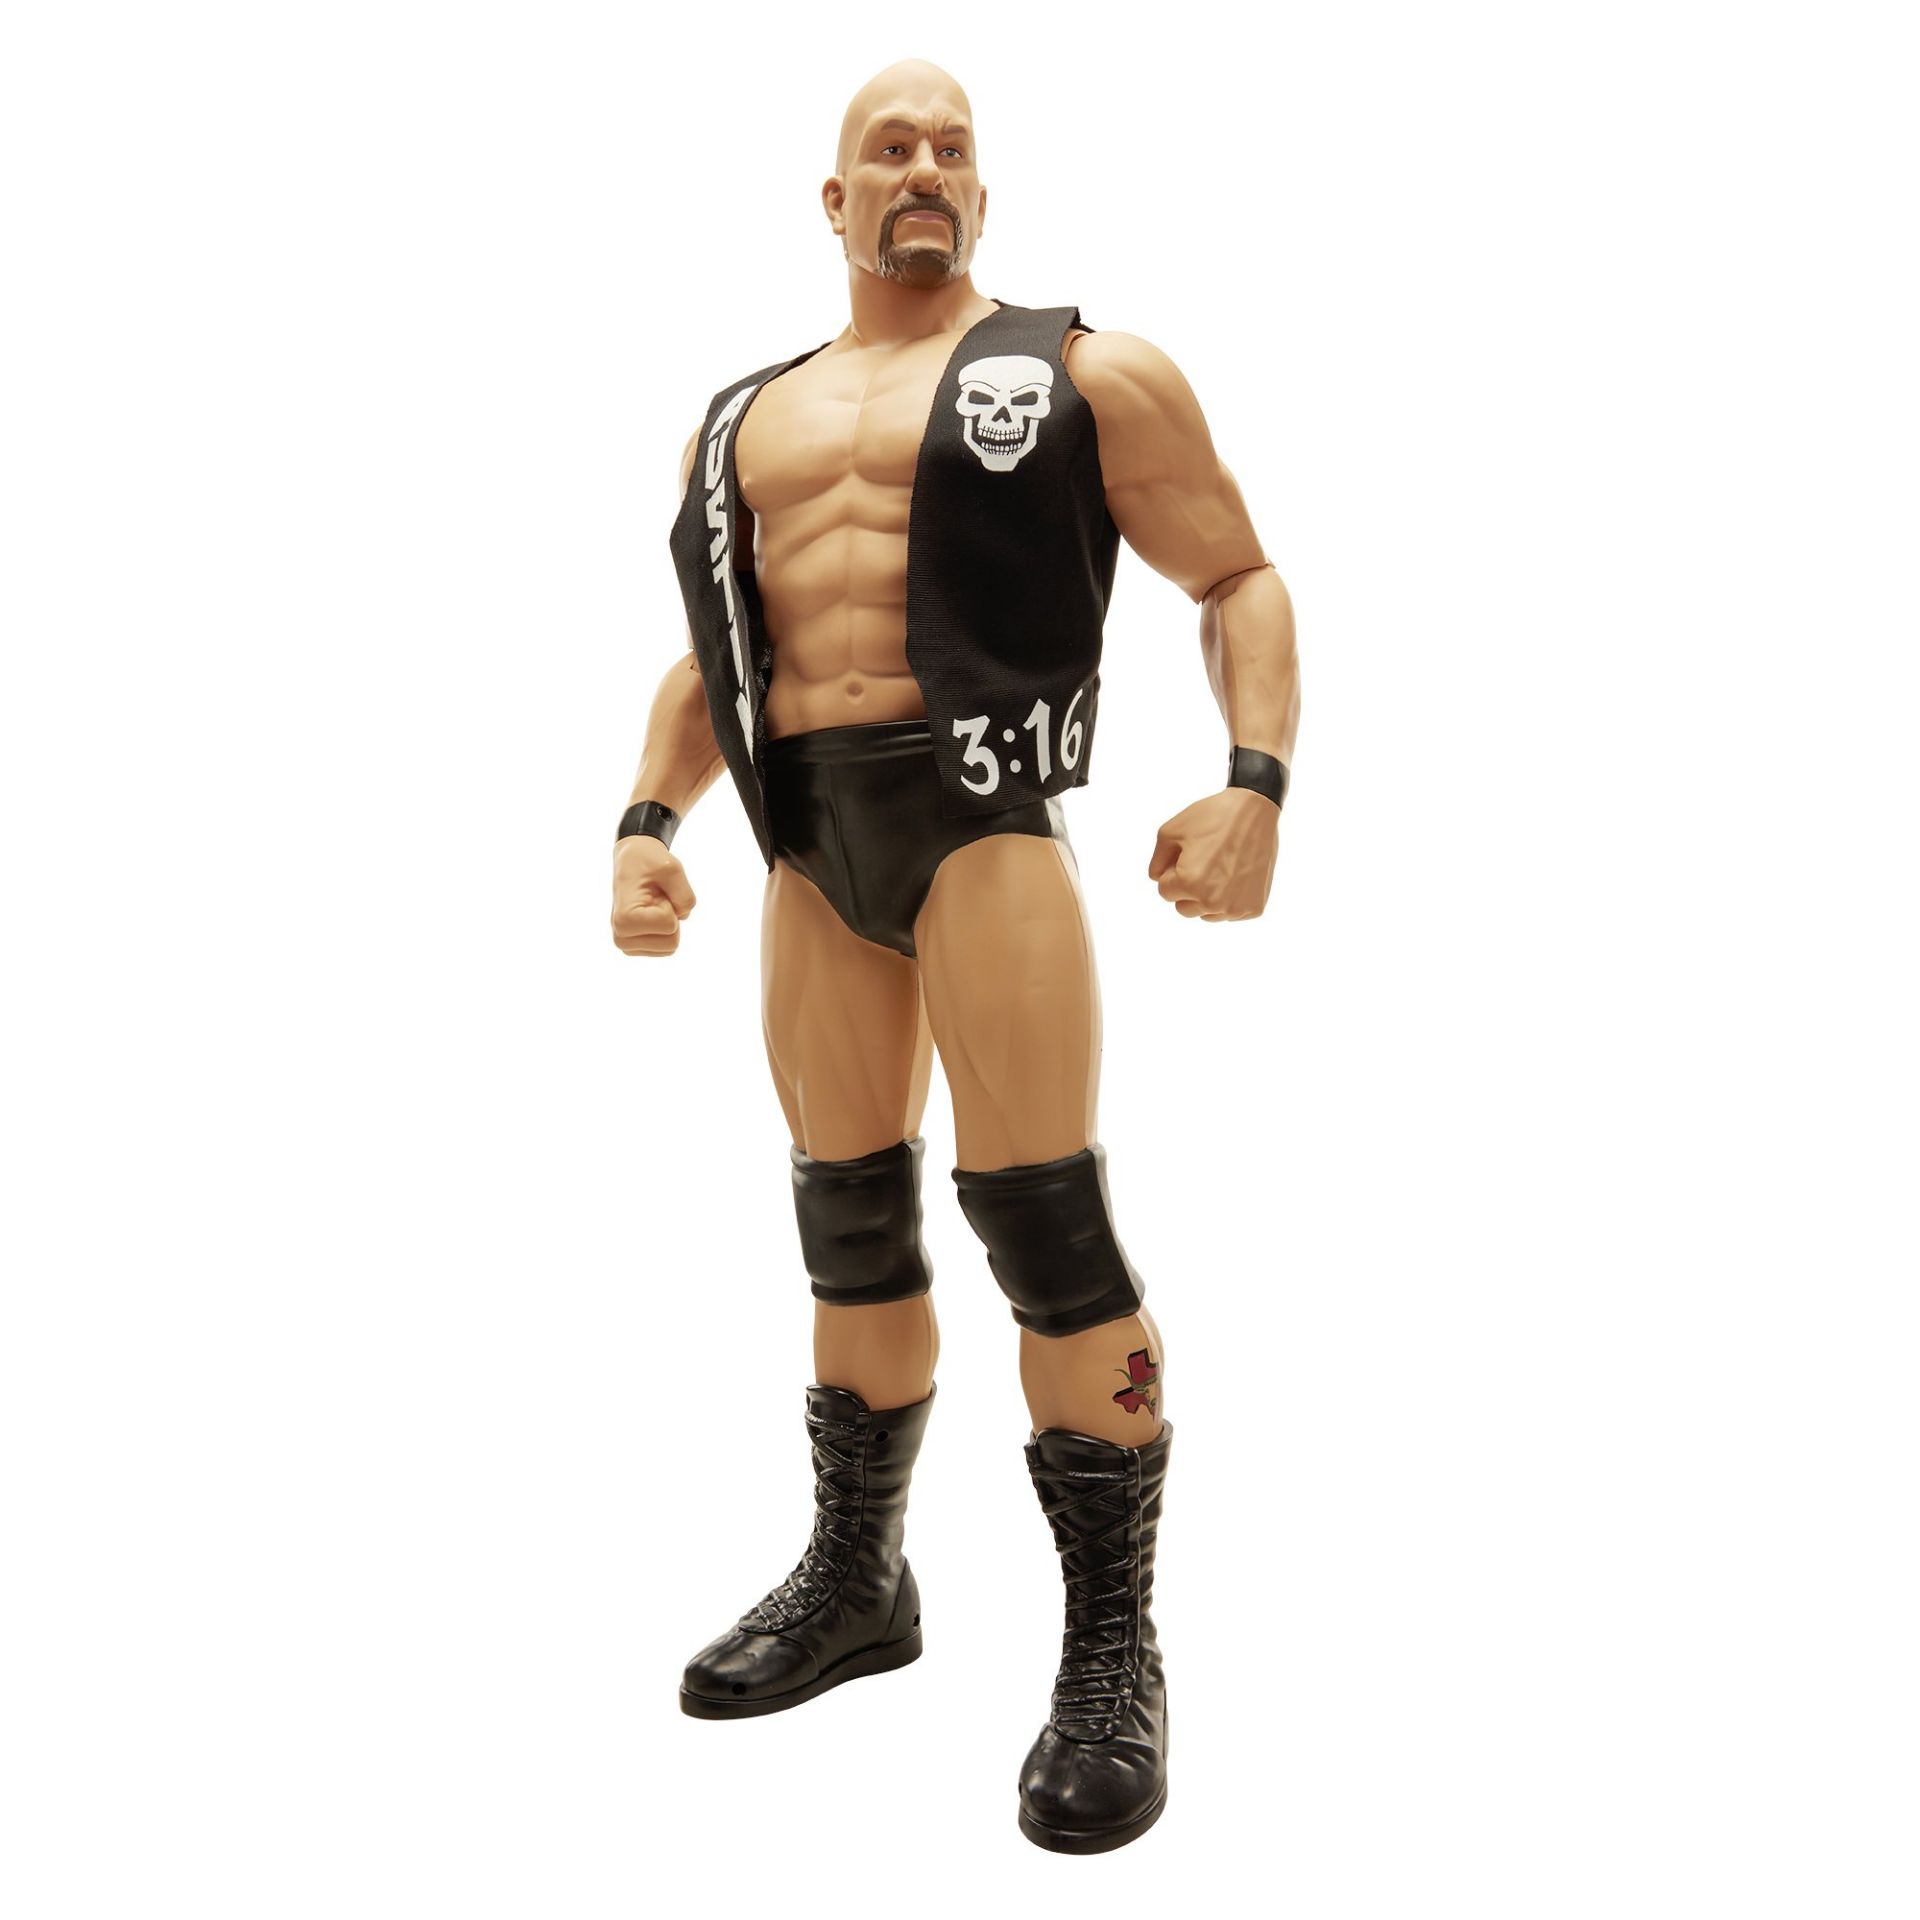 + VAT Brand New Massive 31" WWE Stone Cold Steve Austin Action Figures - 3count.co.uk Price £28. - Image 3 of 4